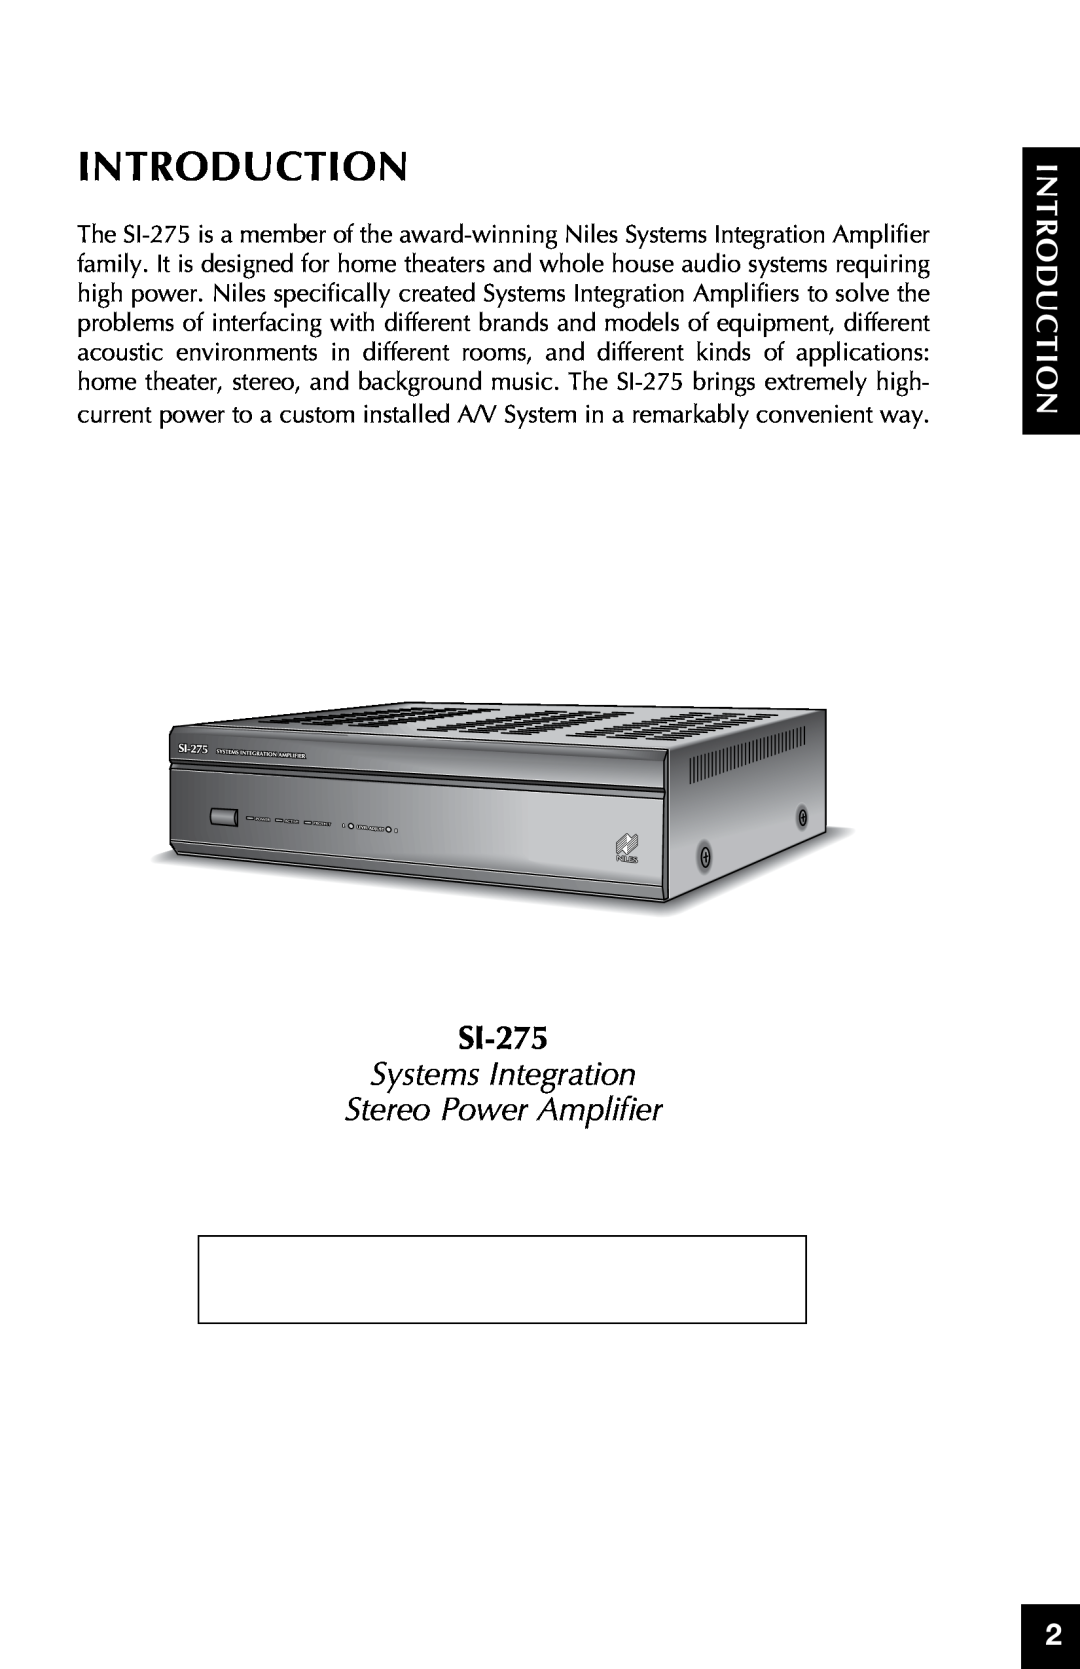 Niles Audio SI-275 manual Introduction, ction Introdu, Systems Integration Stereo Power Amplifier 